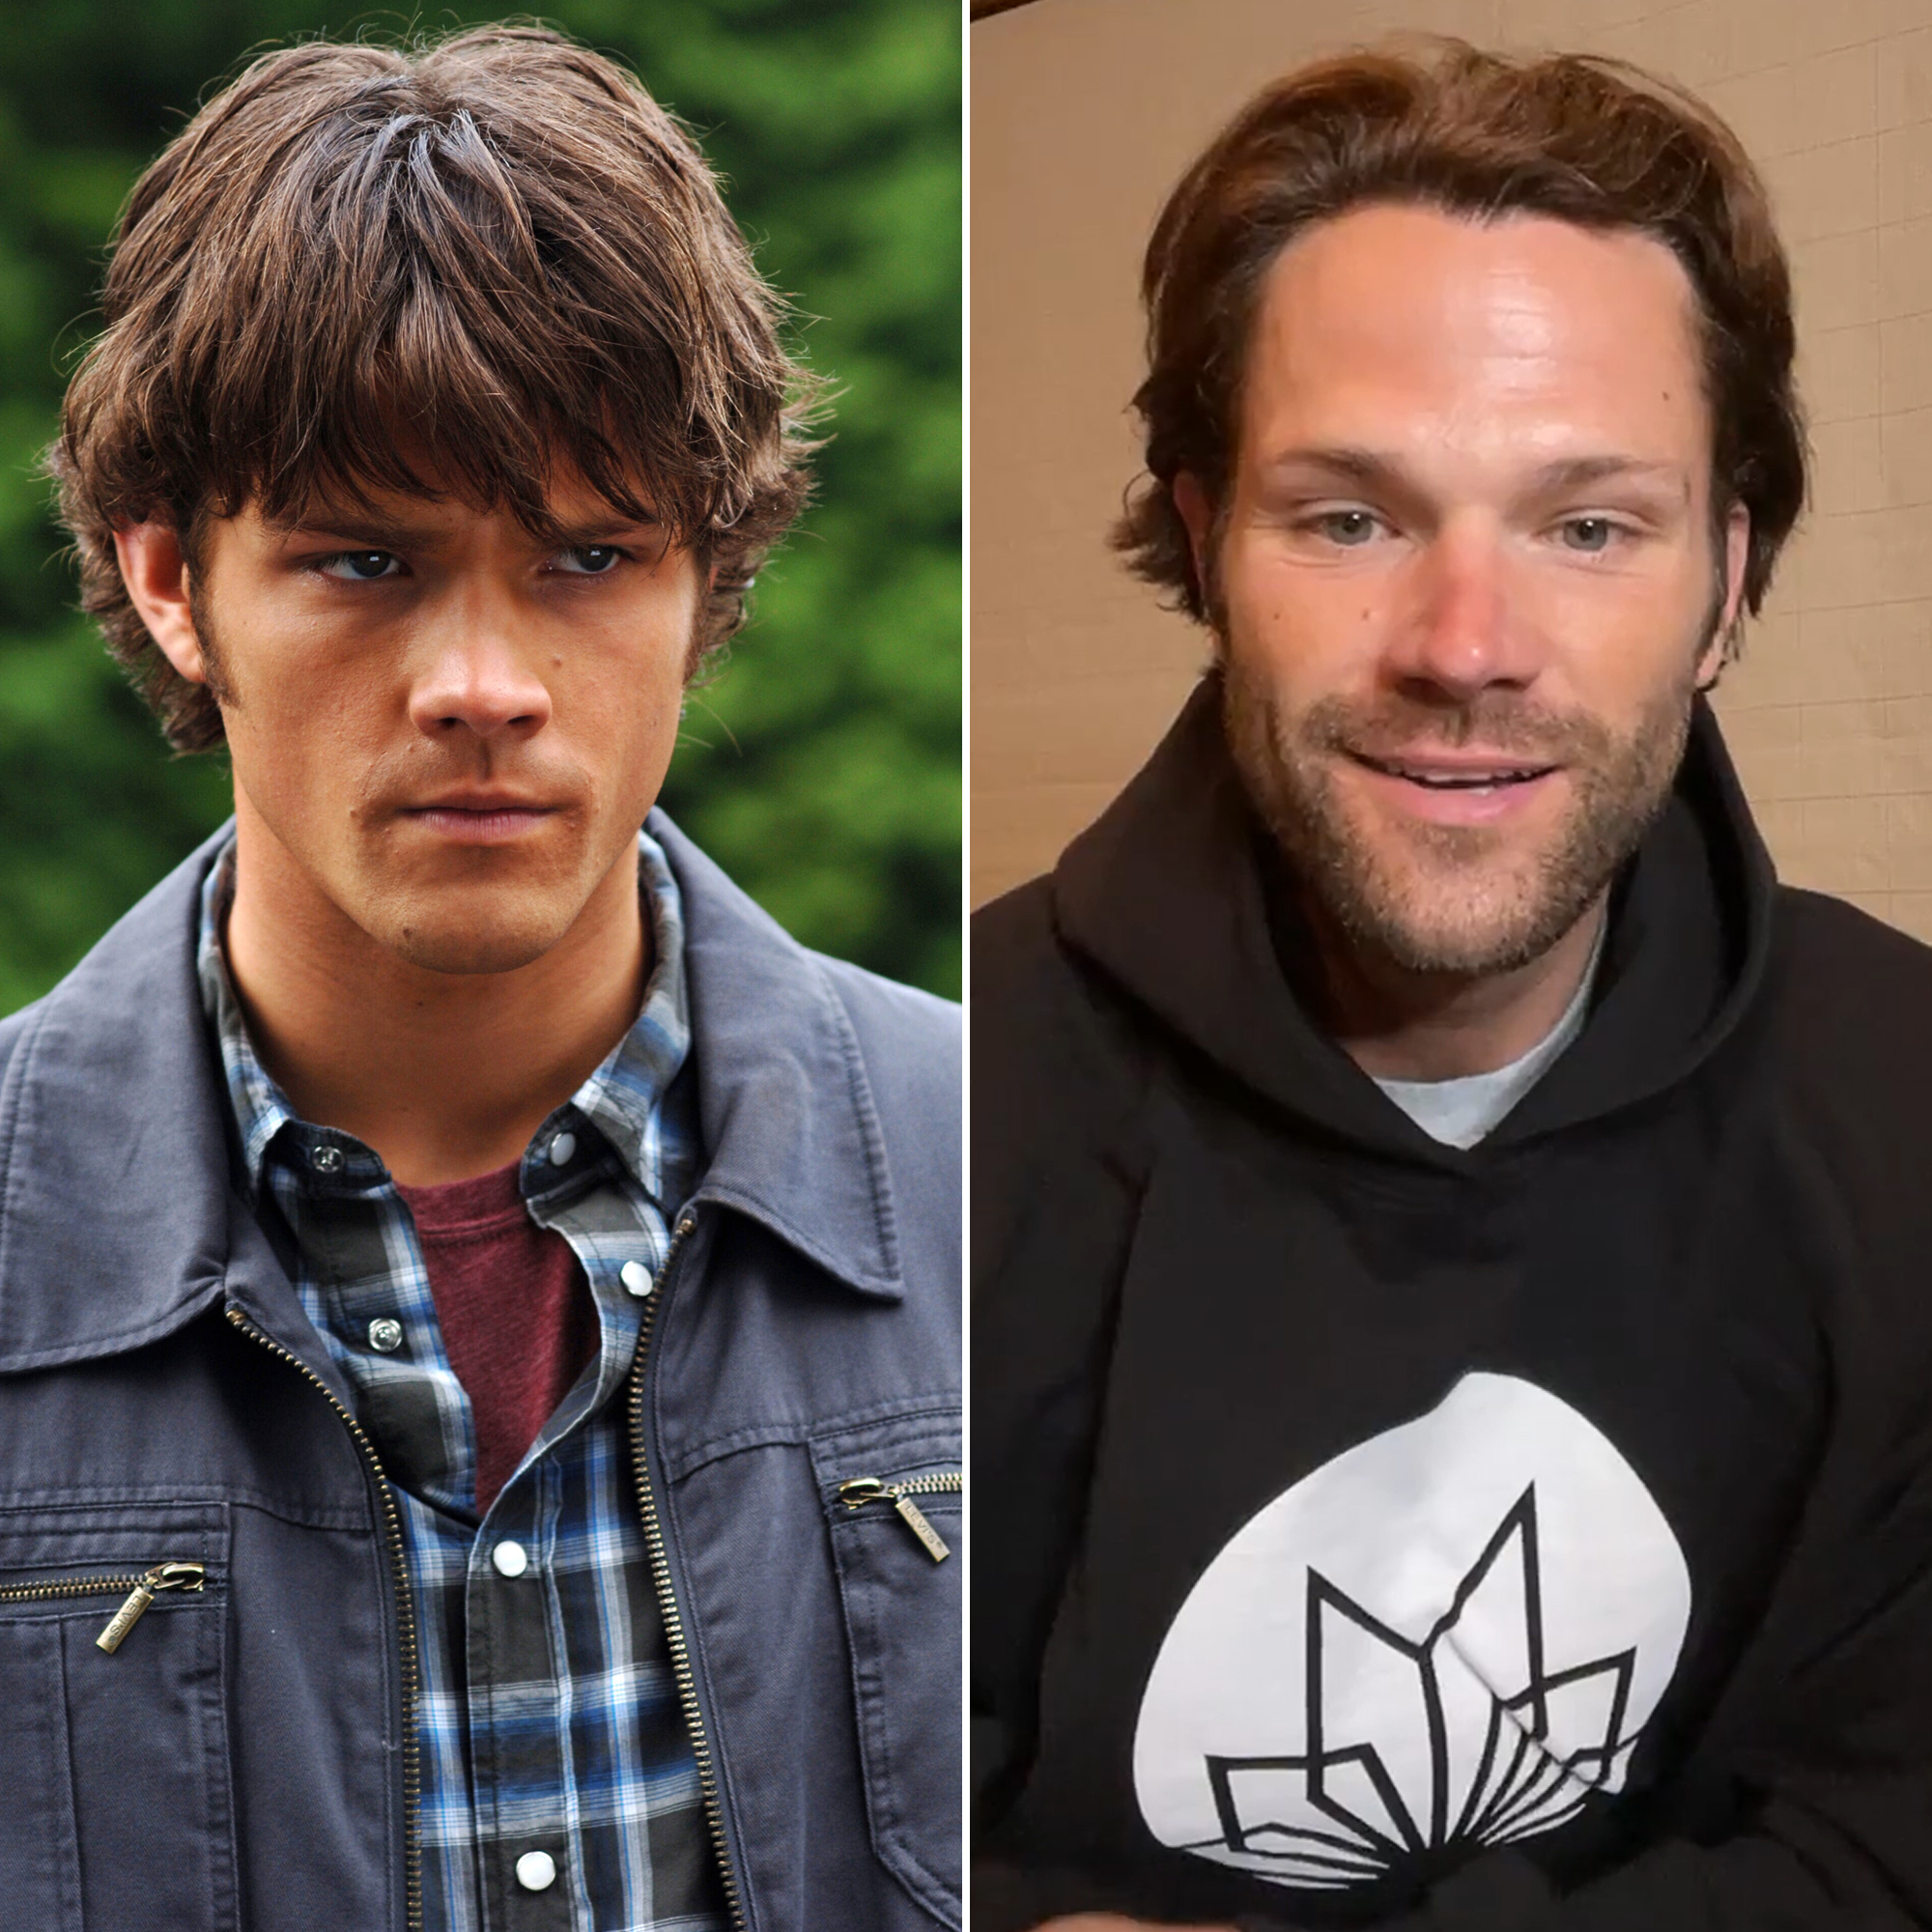 https://www.usmagazine.com/wp-content/uploads/2021/06/Supernatural-Cast-Where-Are-They-Now-Jared-Padalecki.jpg?quality=70&strip=all